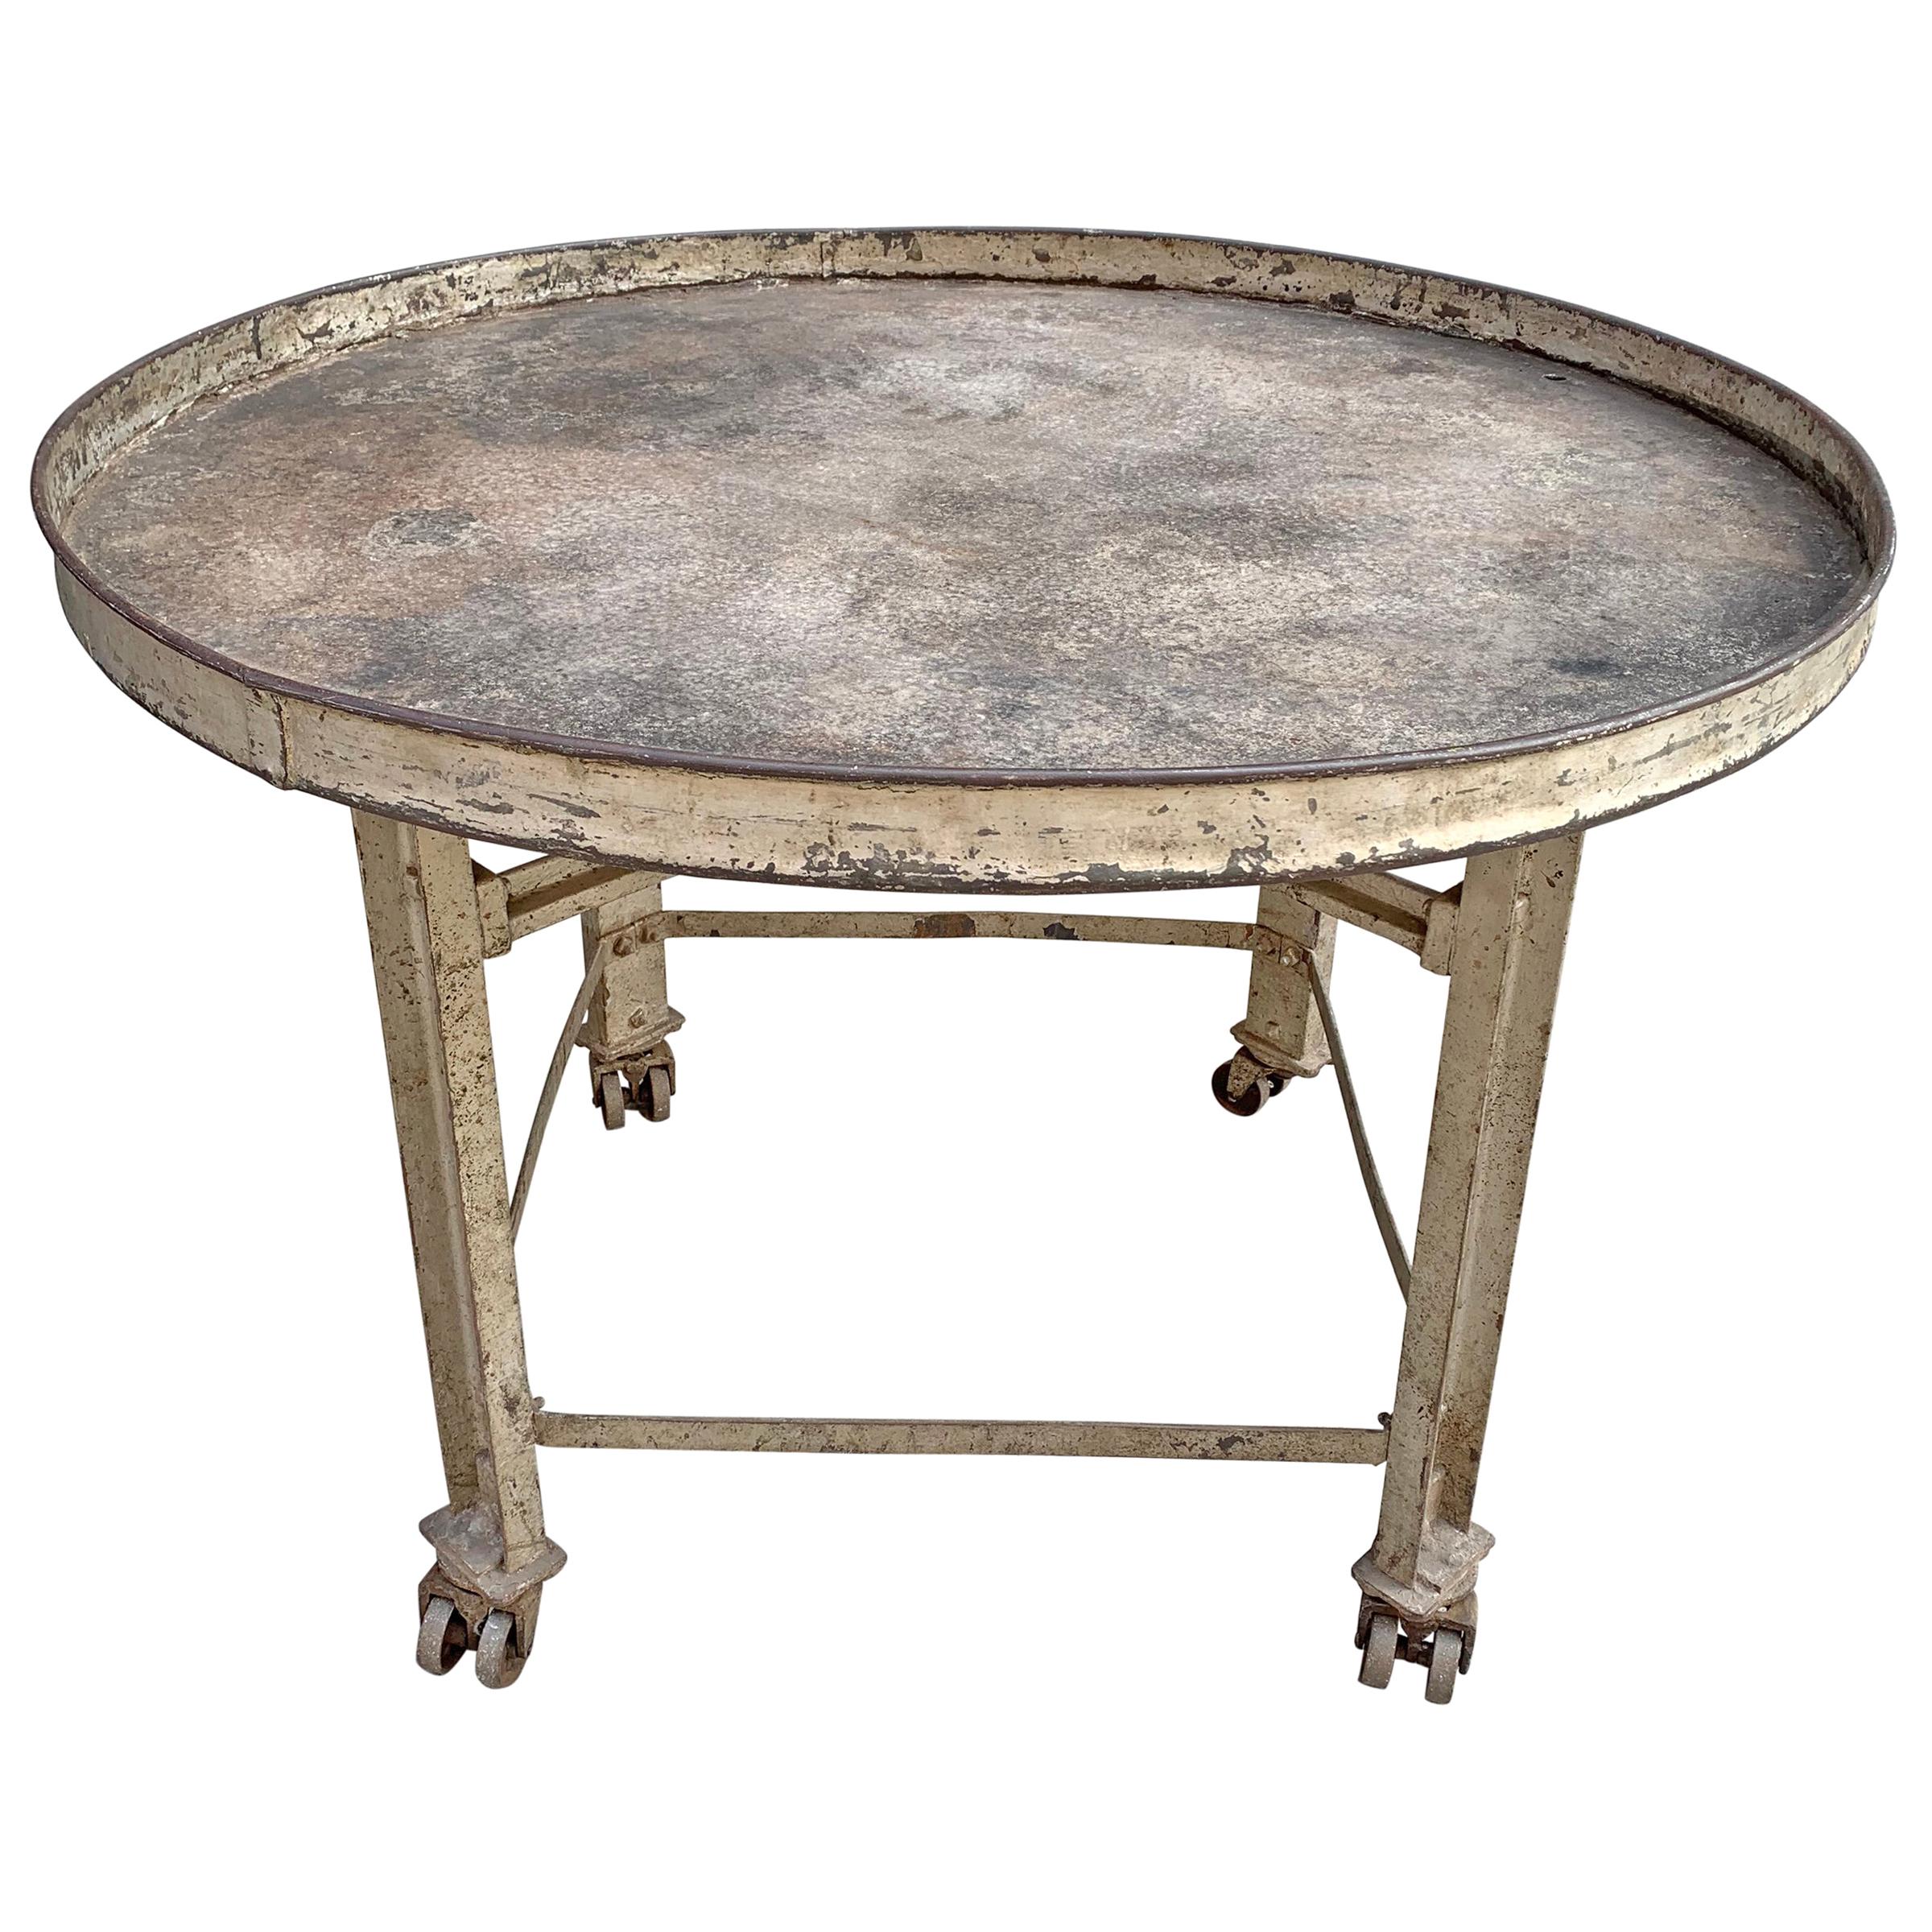 Early 20th Century American Industrial Table with Lazy Susan Top